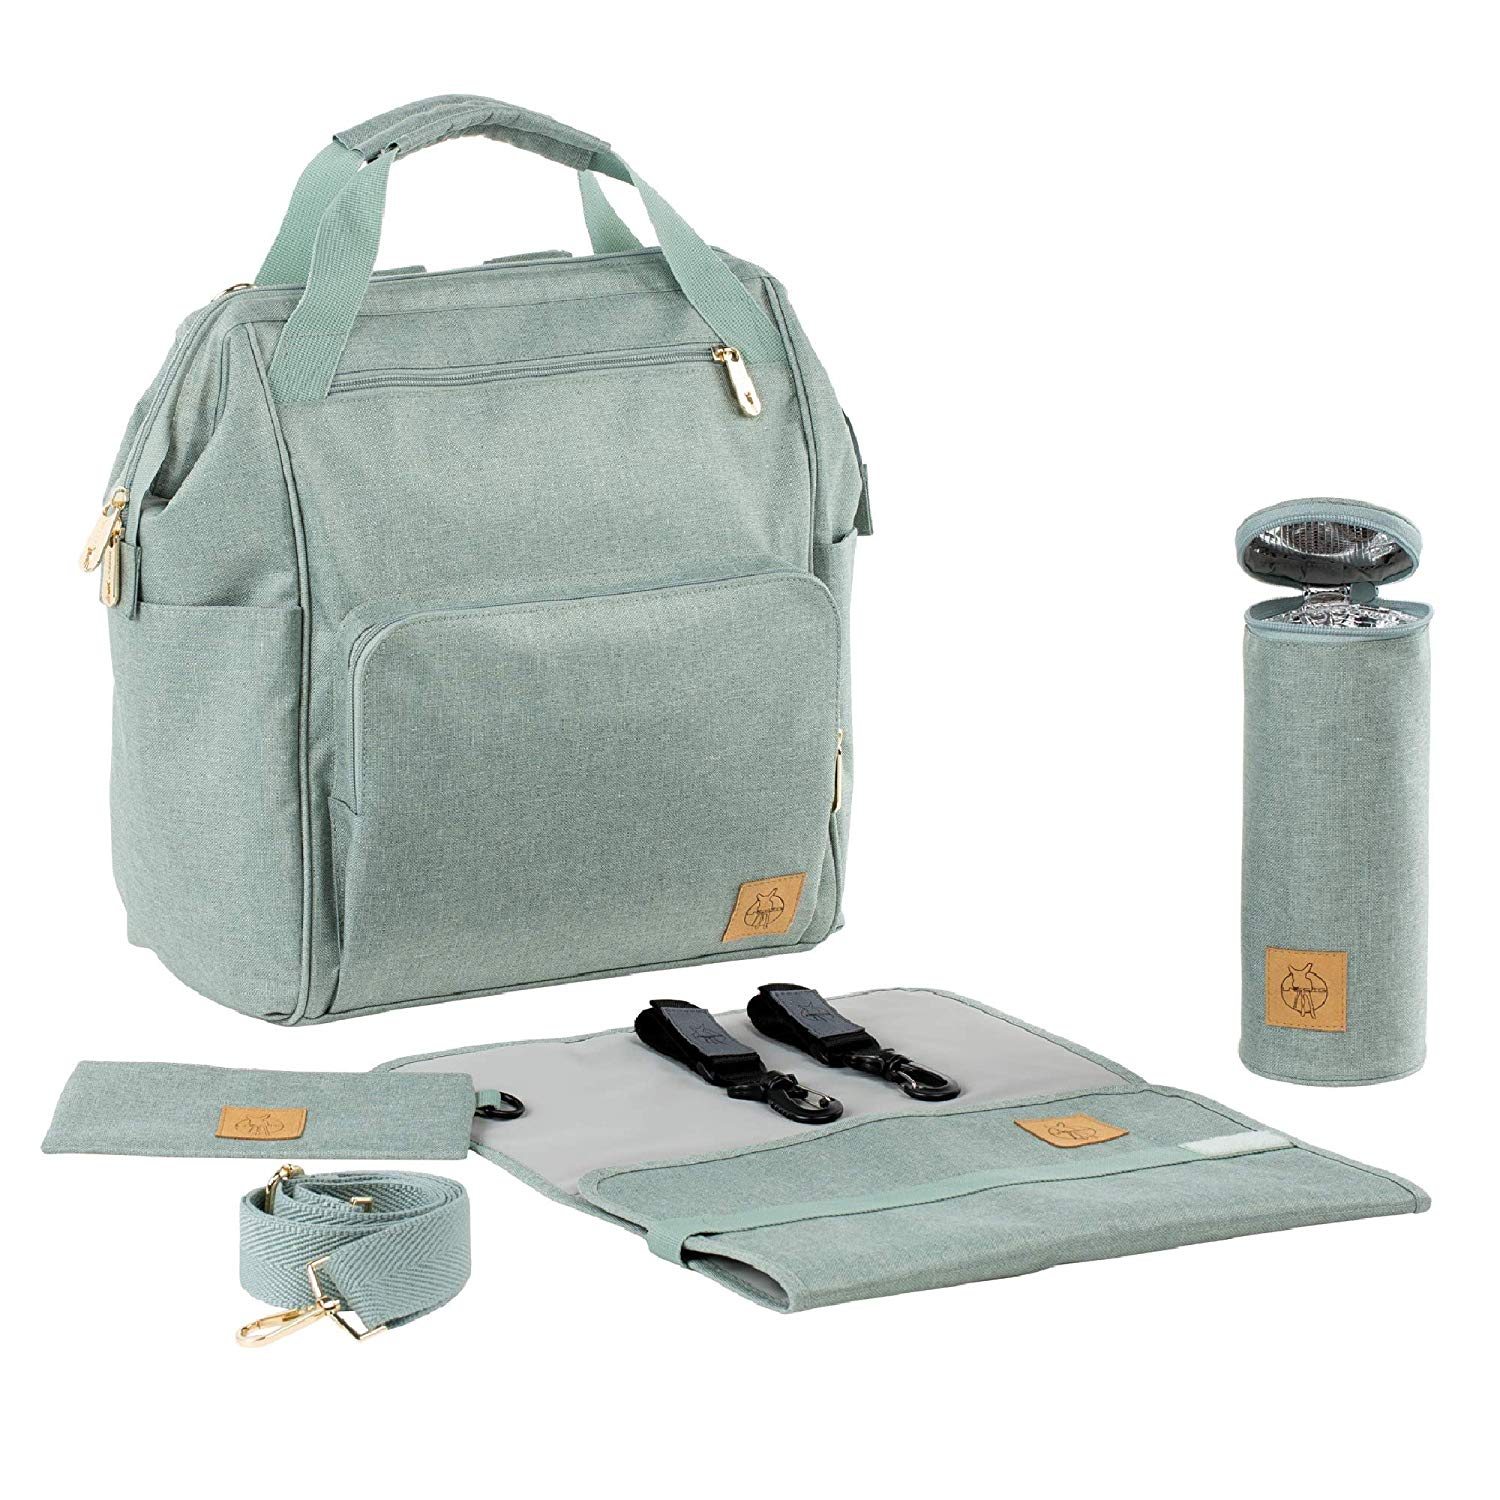 Lässig baby changing backpack, changing bag incl. Changing accessories, sustainably produced / Goldie Backpack mint